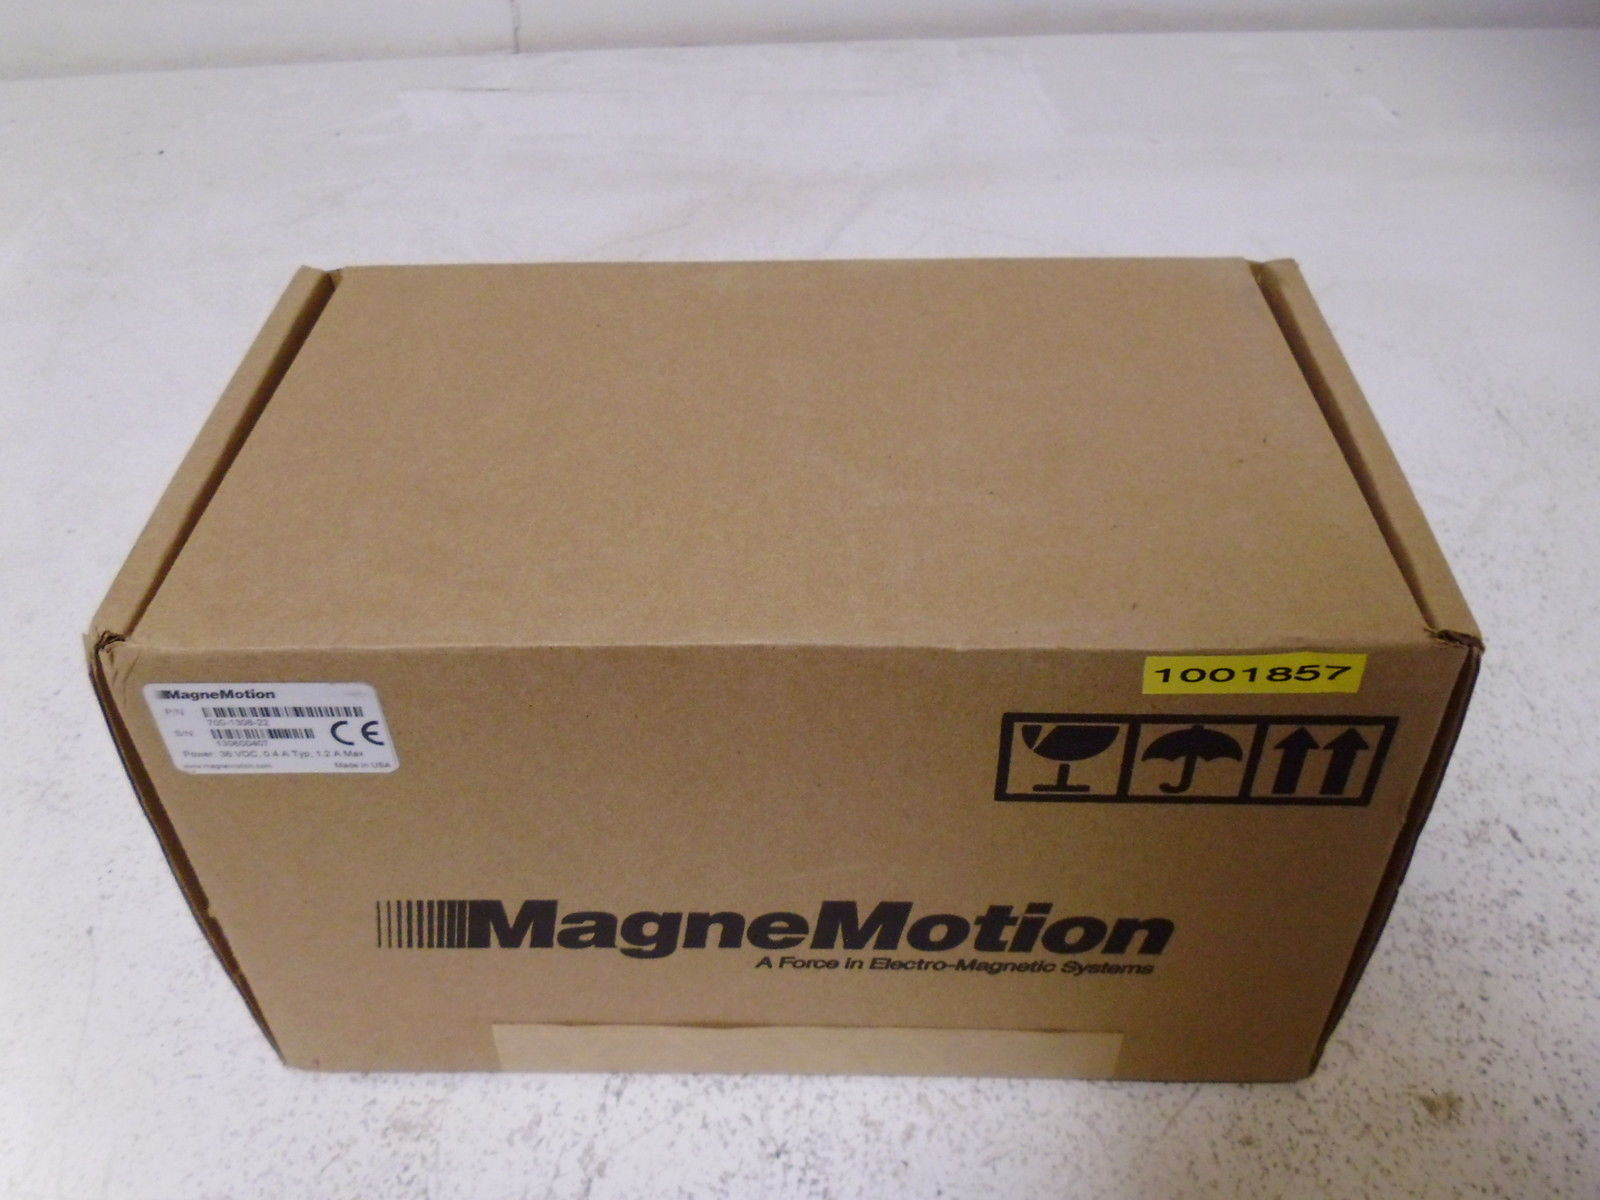 MAGNEMOTION 700-1308-22 *NEW IN BOX*